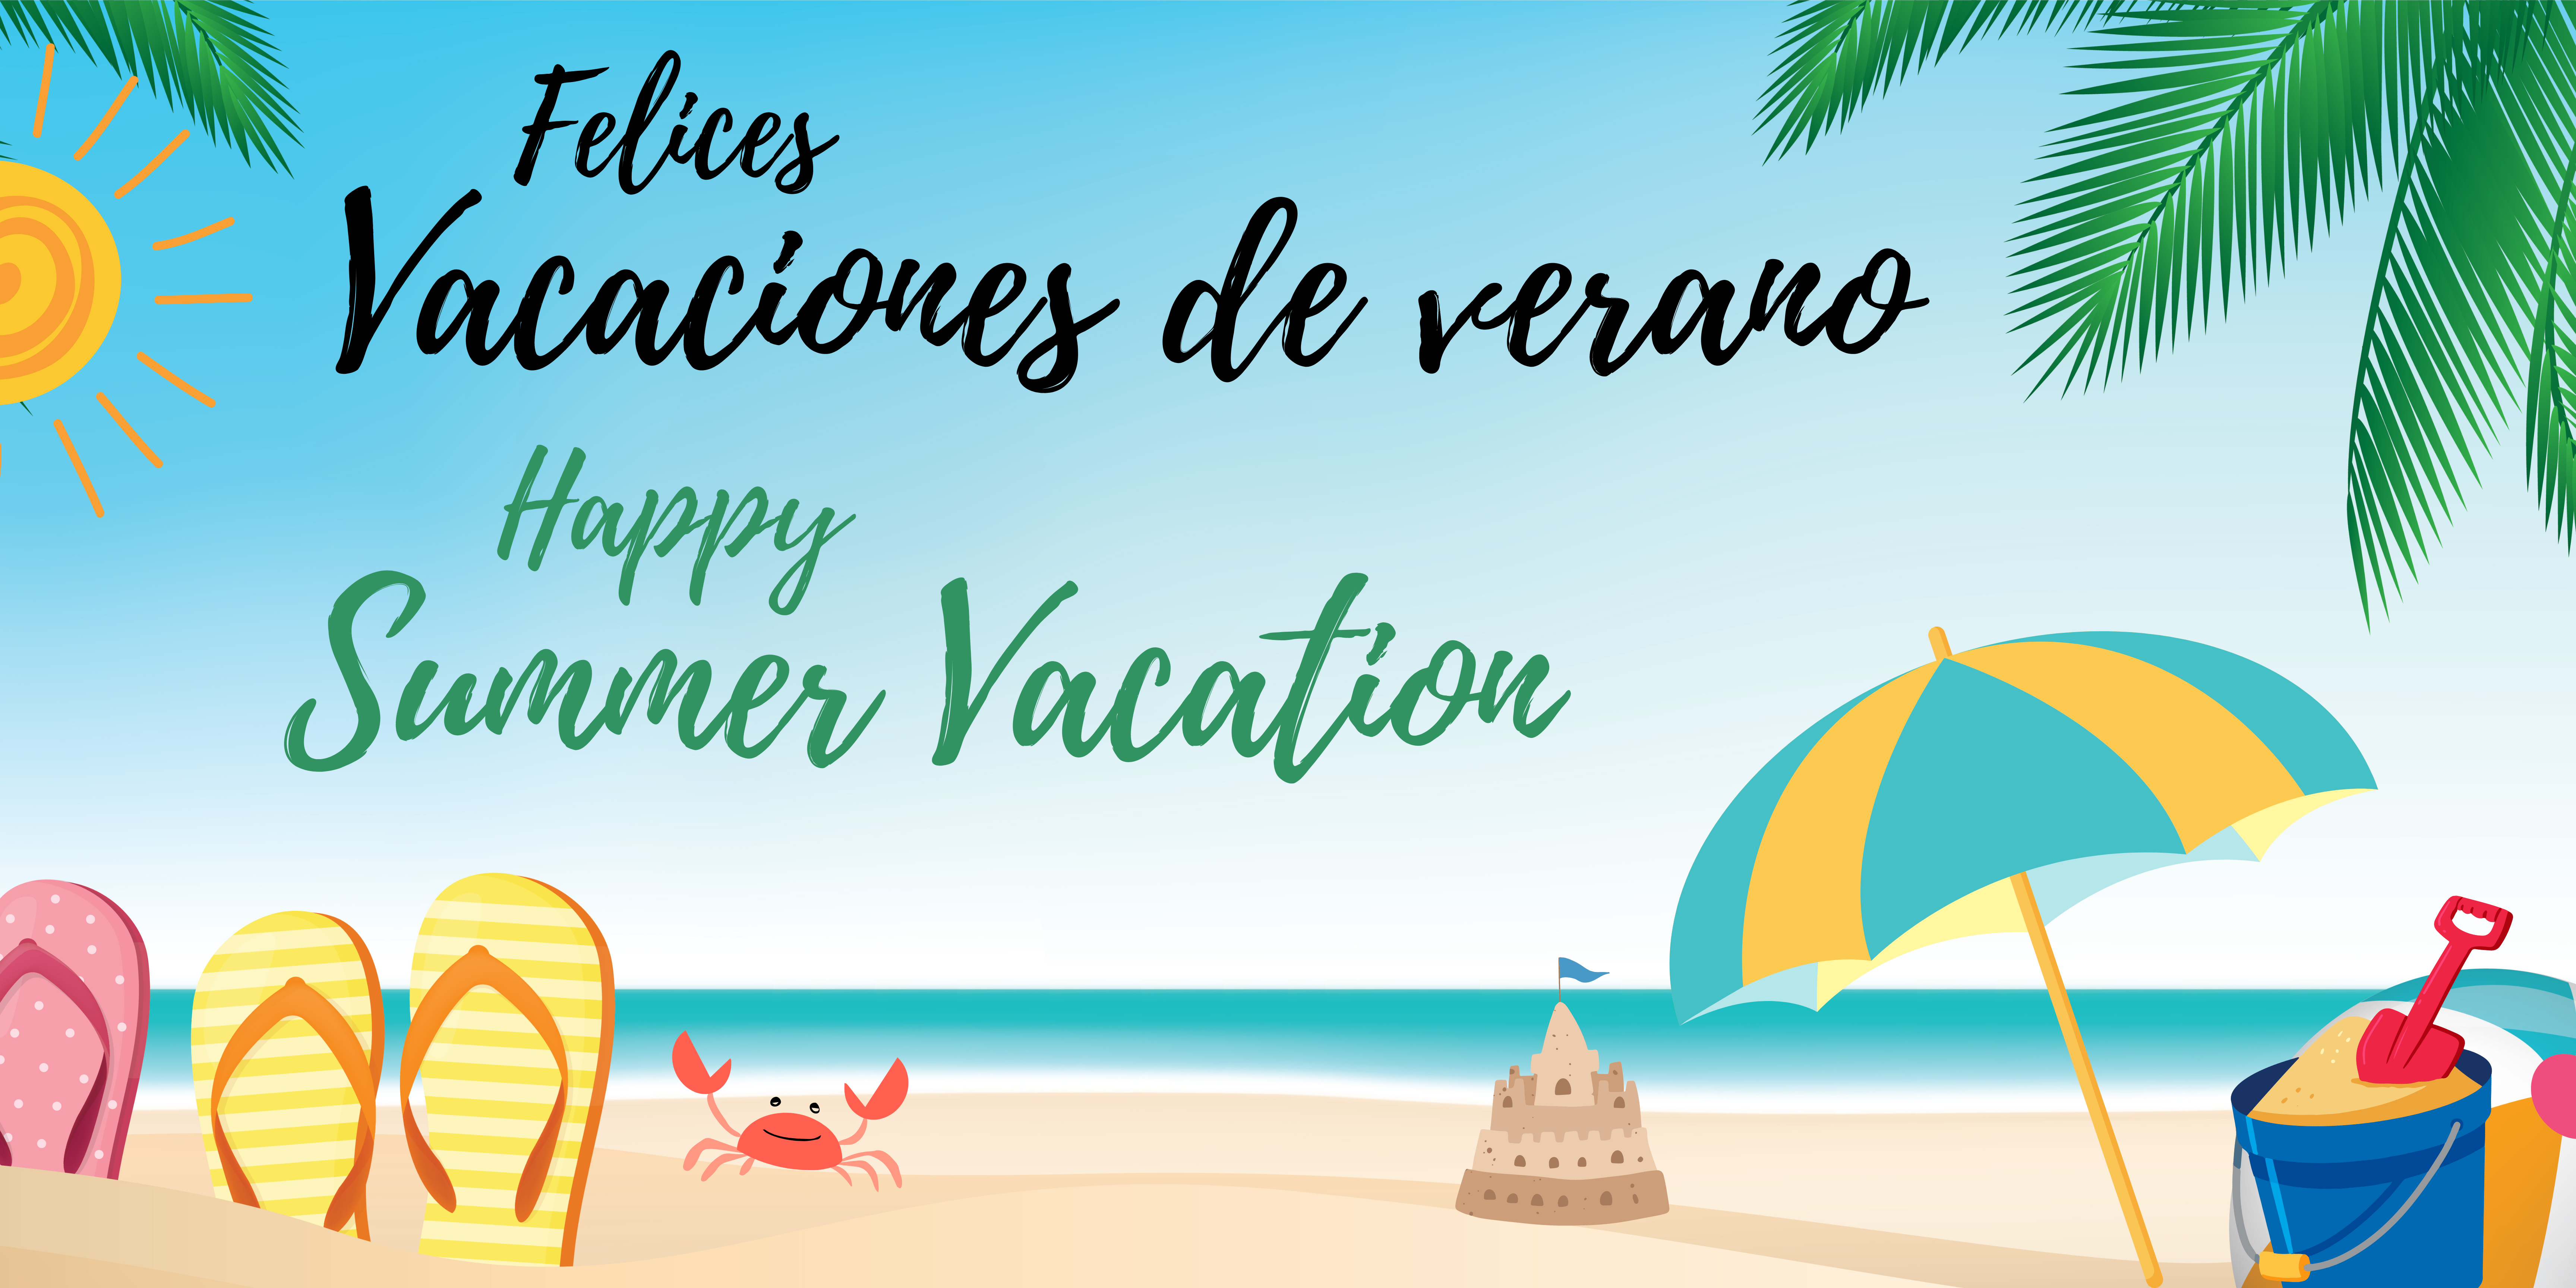 Image of a beach scene with sand, water, flip-flops and beach toys. Text says, "Happy Summer Vacation" and "Felices Vacaciones de verano"